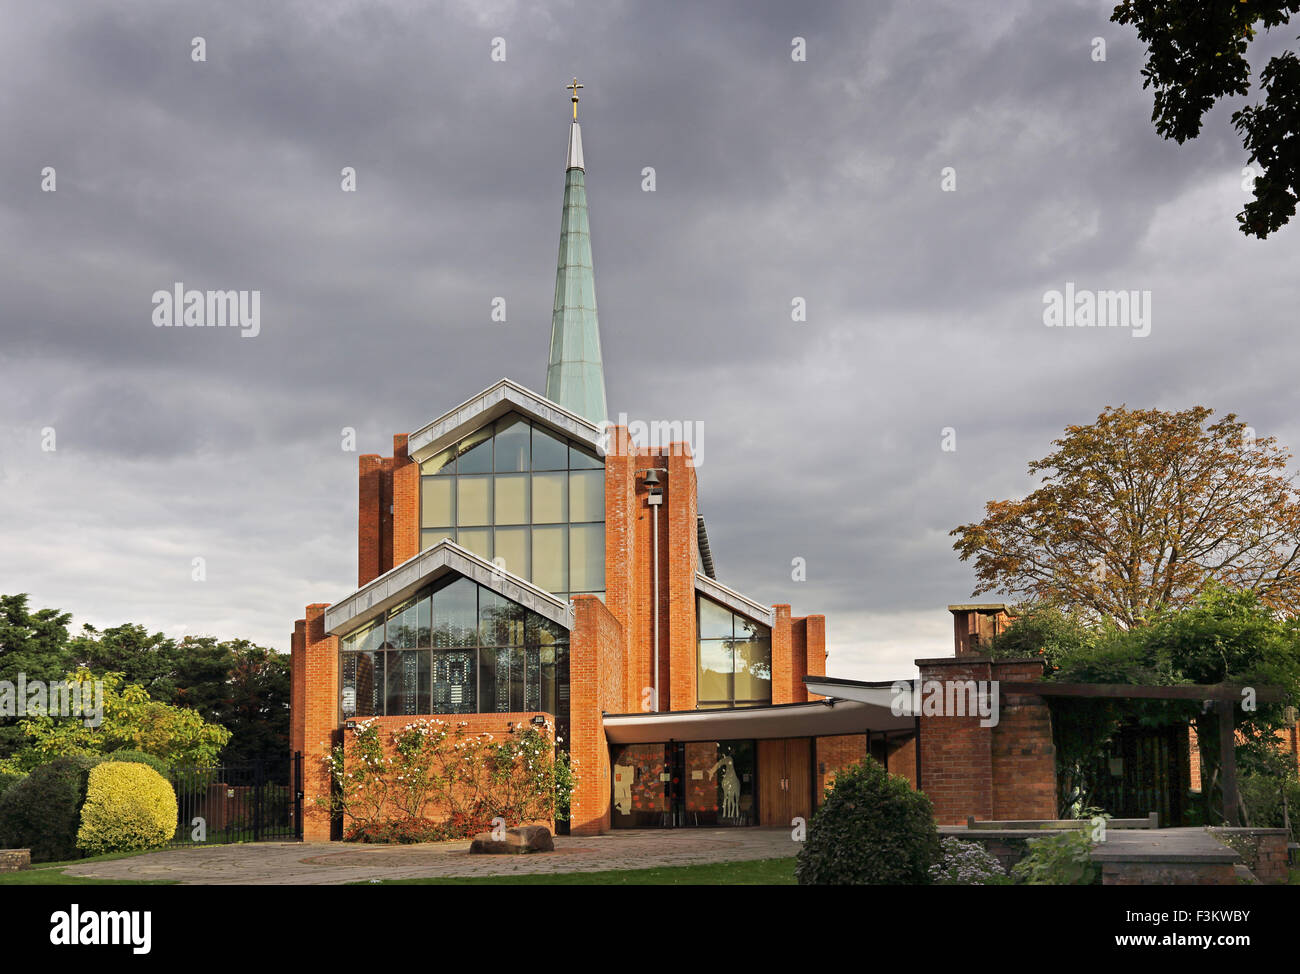 The church of St Barnabus, East Dulwich, London. Built in 1992 to a modern design by Architects Hellmuth, Obata & Kassabaum Stock Photo